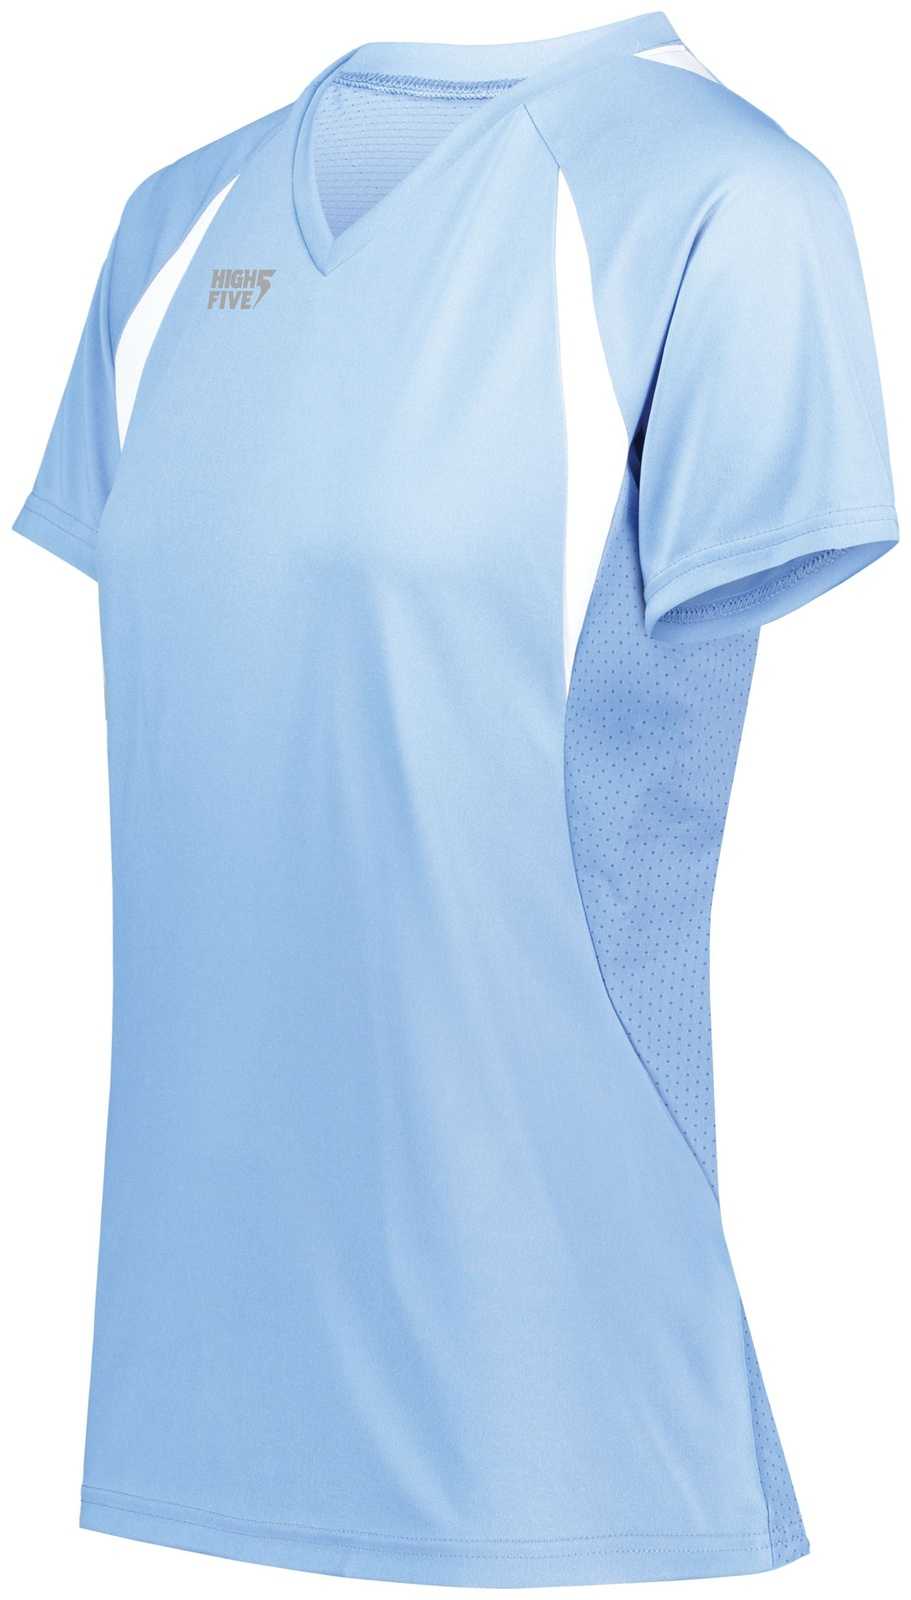 High Five 342232 Ladies Color Cross Jersey - Columbia Blue White - HIT a Double